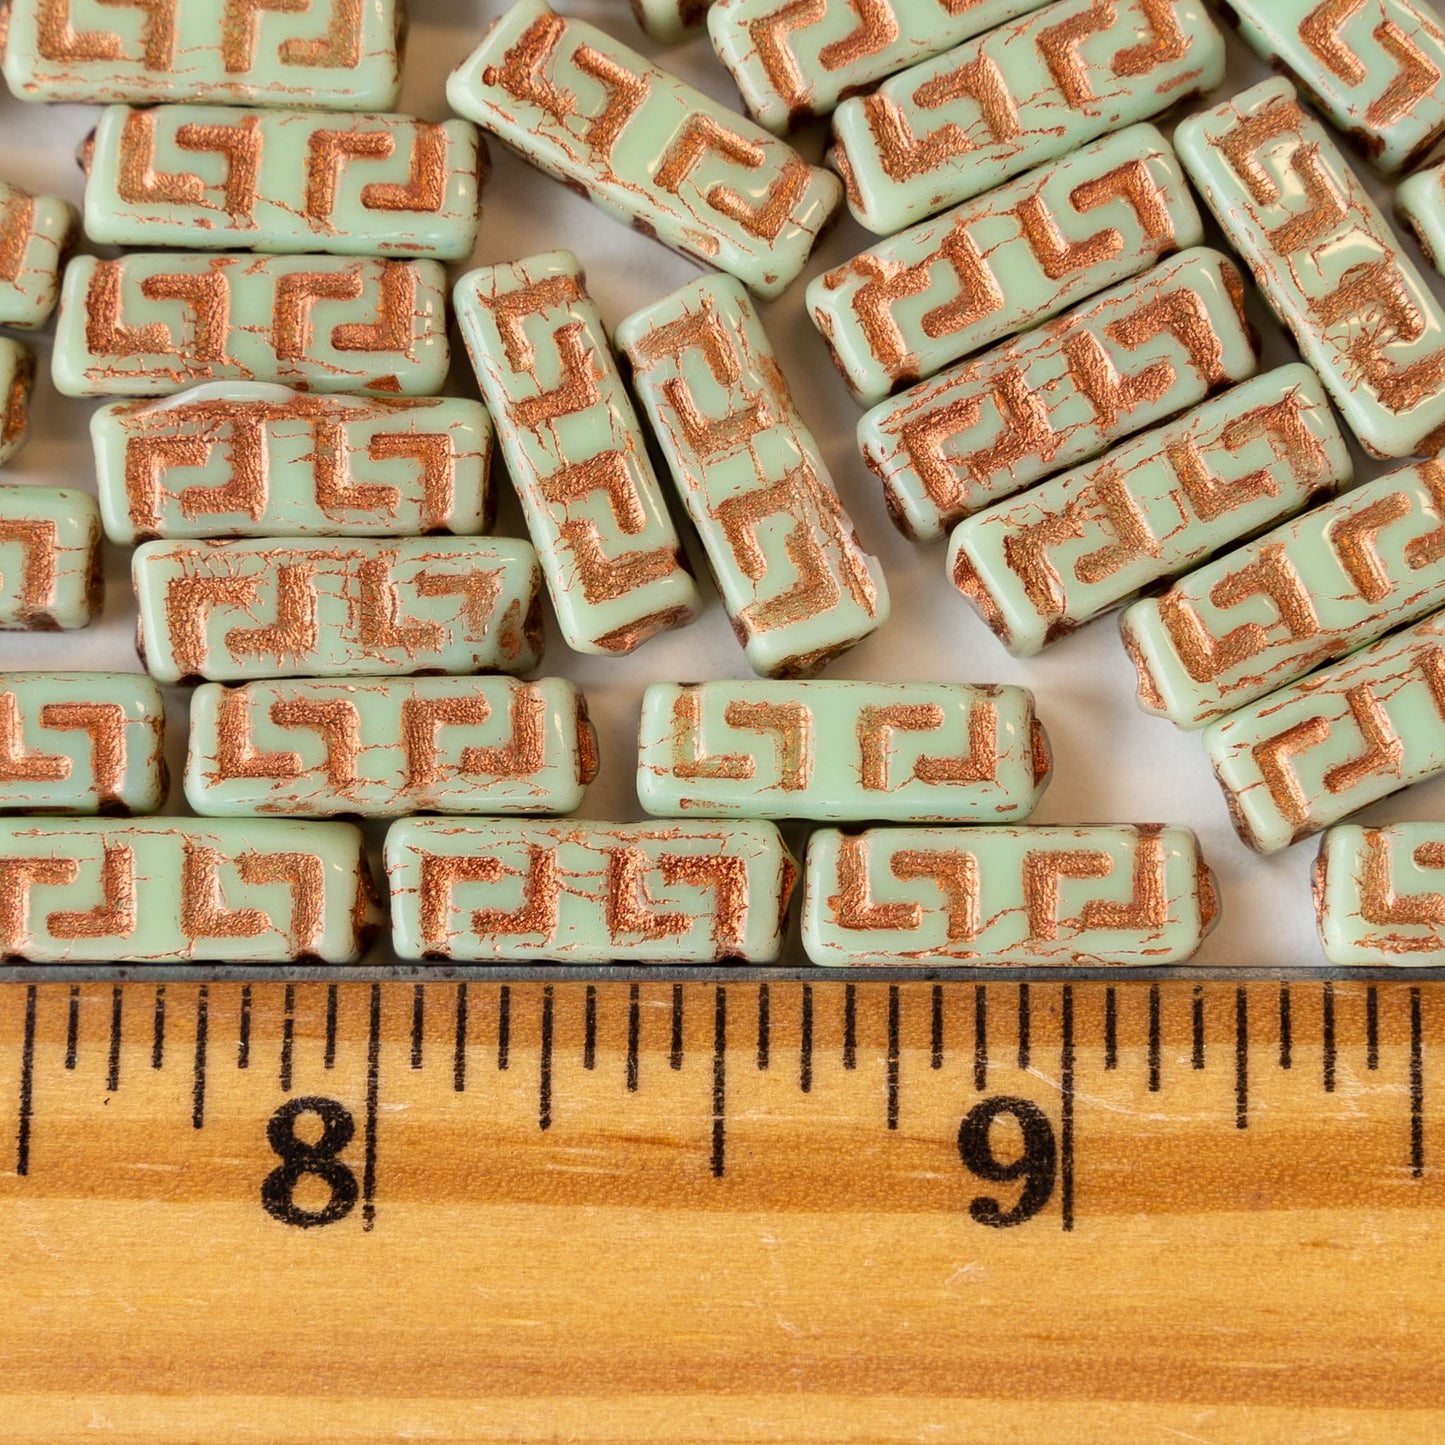 15mm Rectangle Celtic Block Beads - Turquoise with Copper Wash - 10 Beads